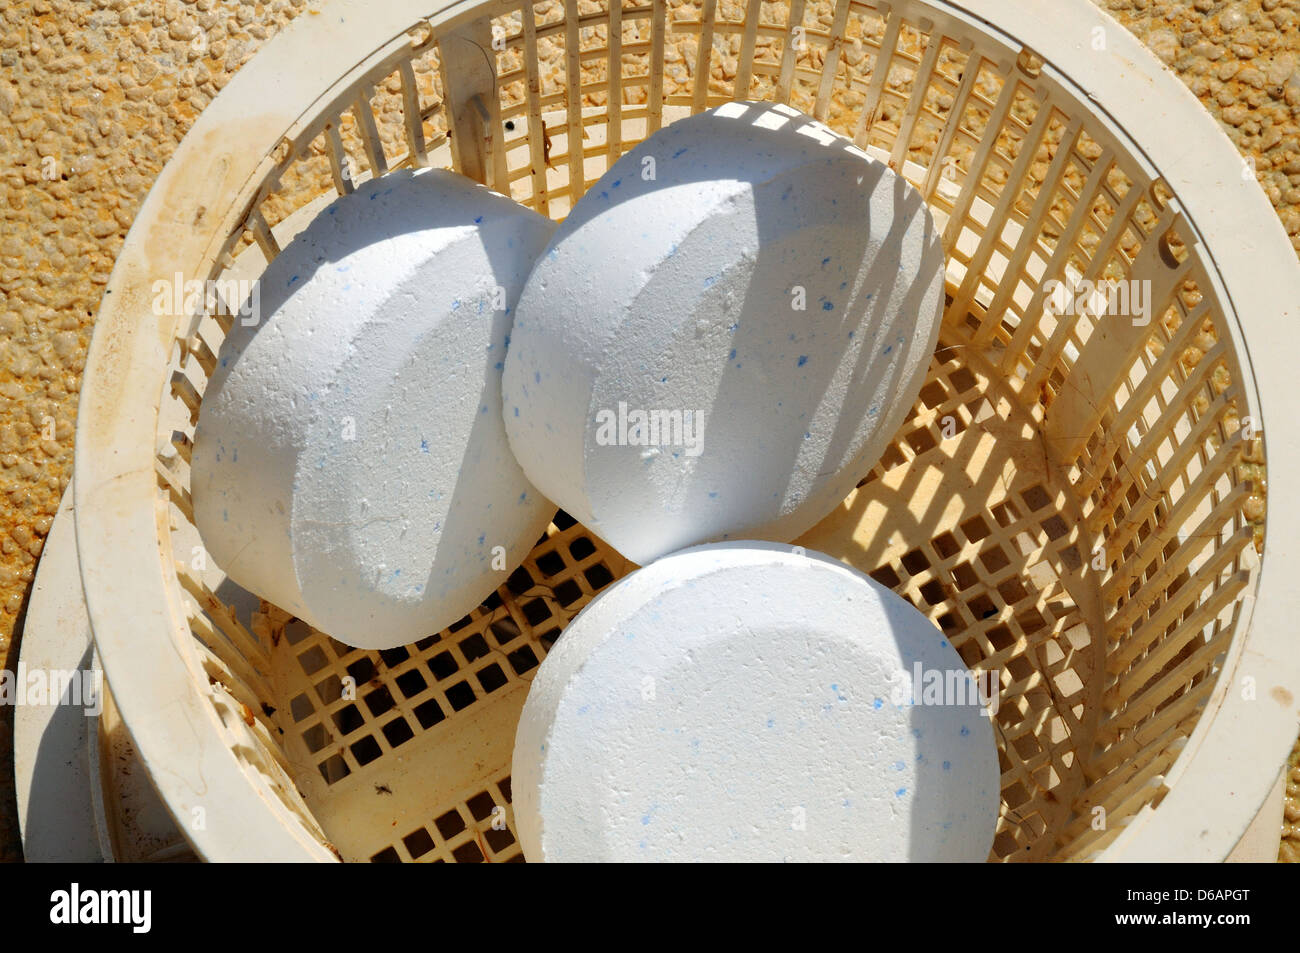 Pool chlorine tablets in basket, Costa del Sol, Andalucia, Spain, Western Europe. Stock Photo